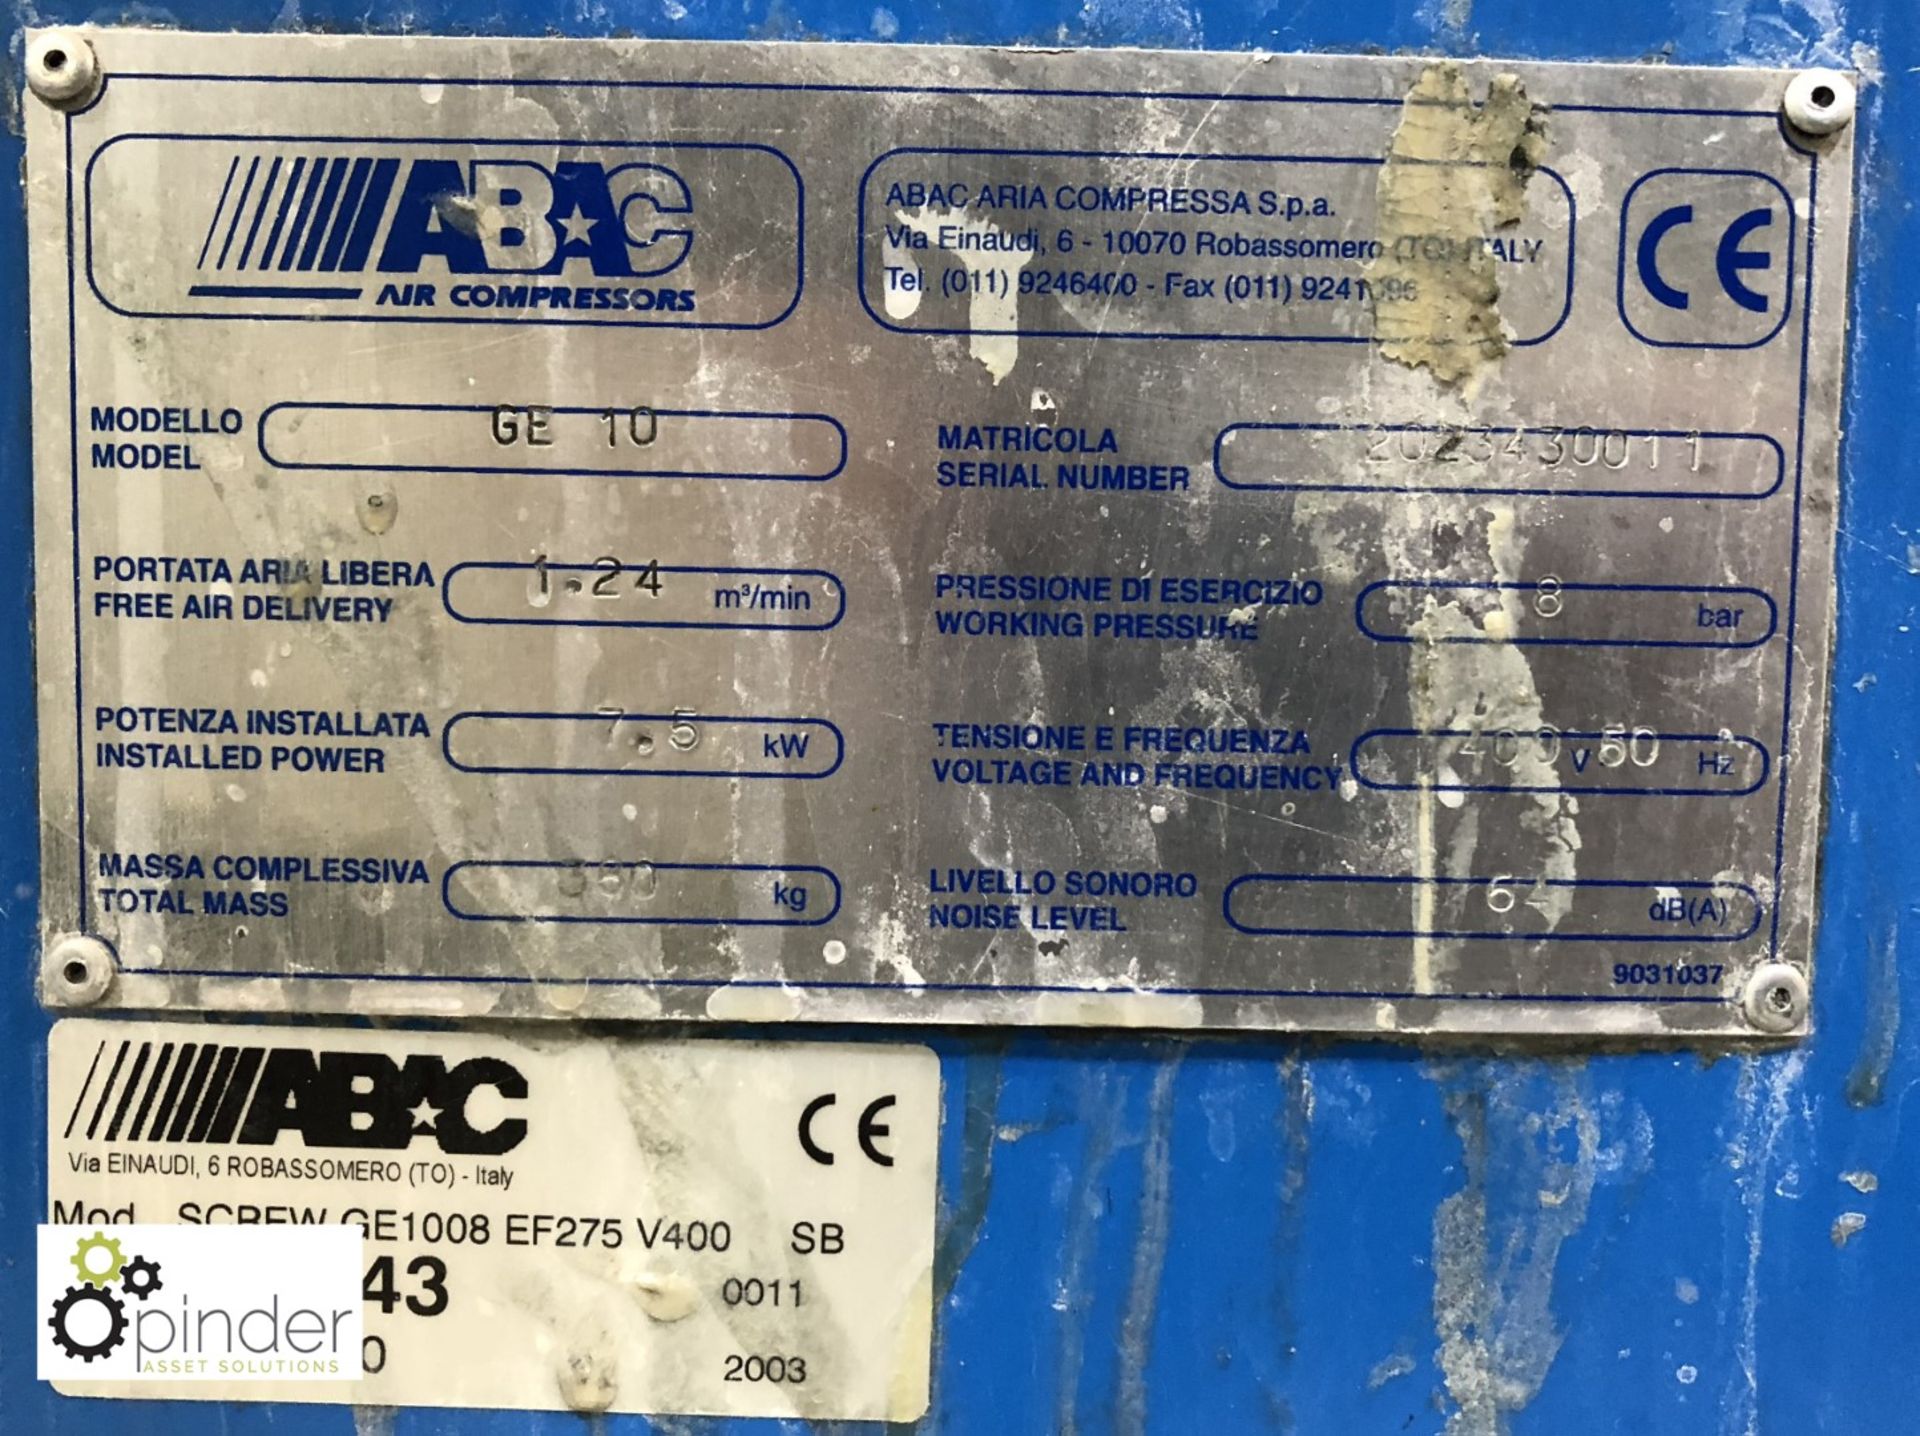 Abac GE10 receiver mounted Packaged Air Compressor, 8bar, 7.5kw, serial number 2023430011, year - Image 3 of 4